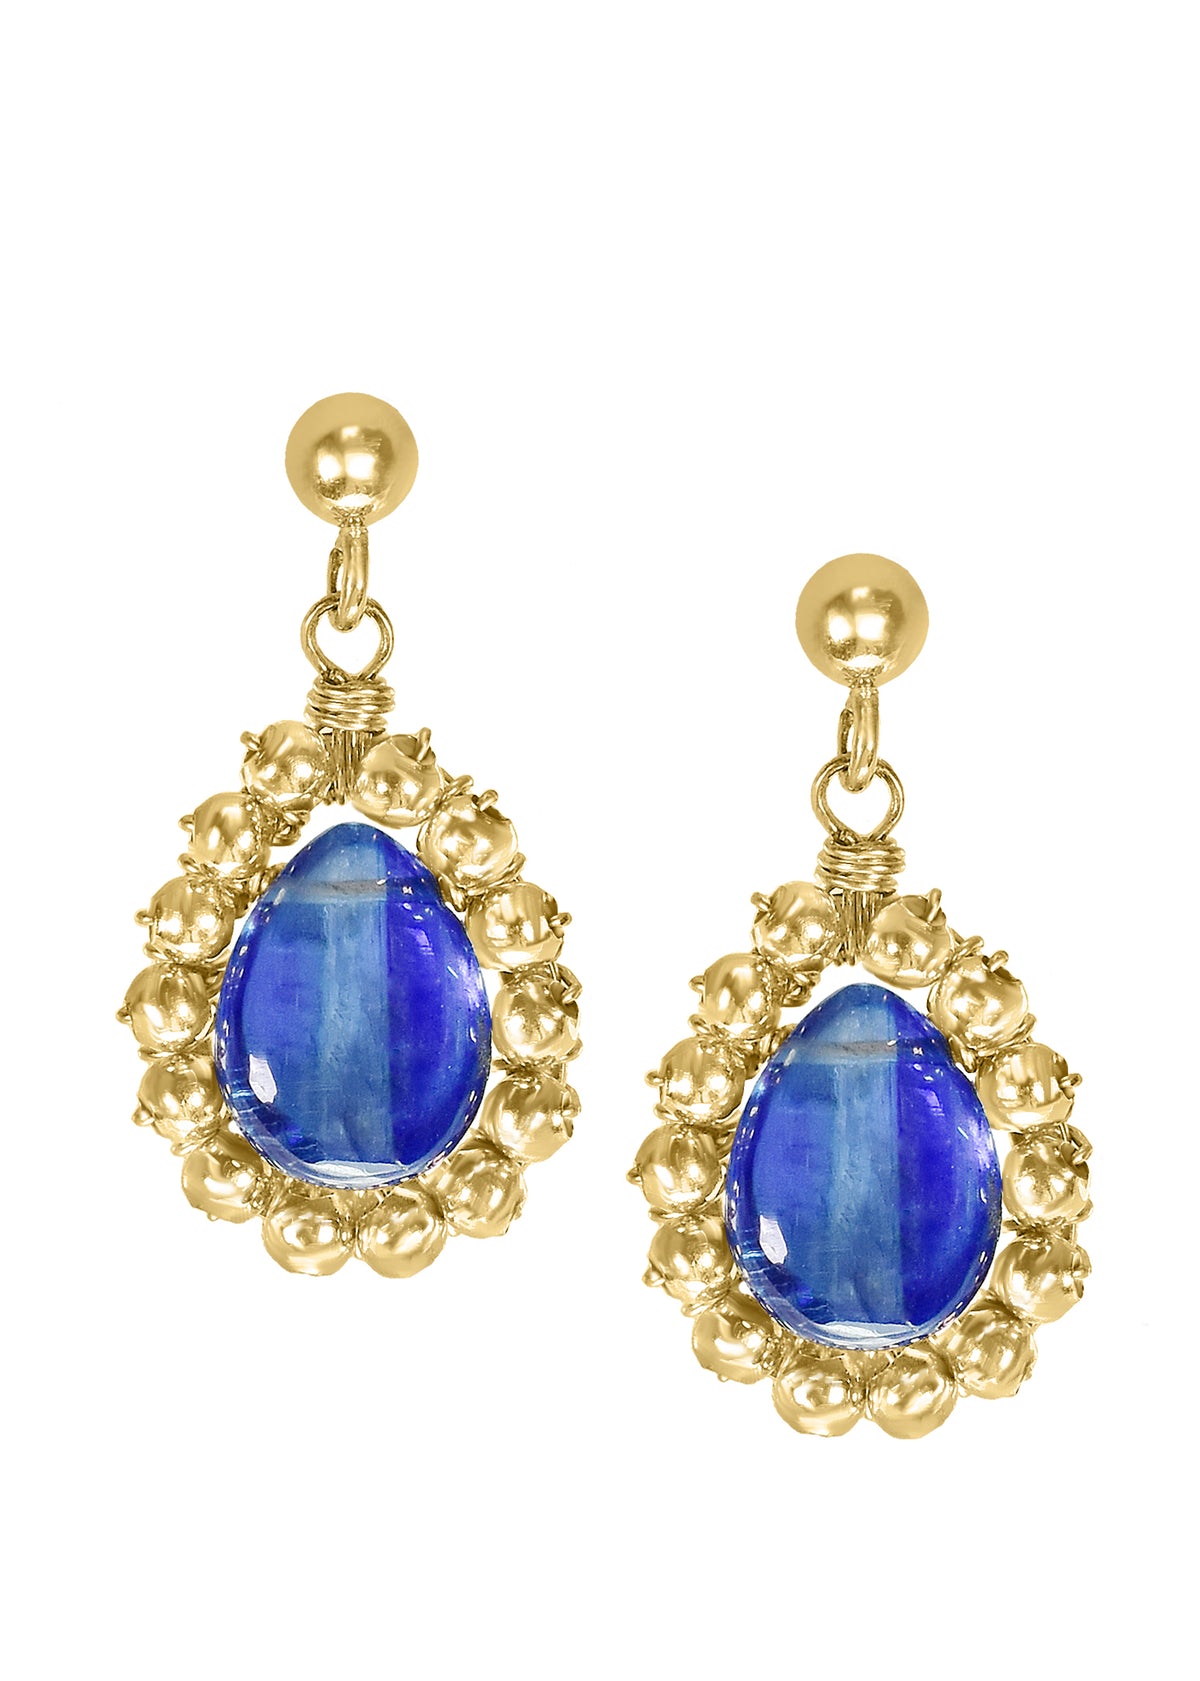 Kyanite 14k gold fill Earrings measure 5/8&quot; in length (including the posts) and 3/8&quot; in width at the widest point Handmade in our Los Angeles studio